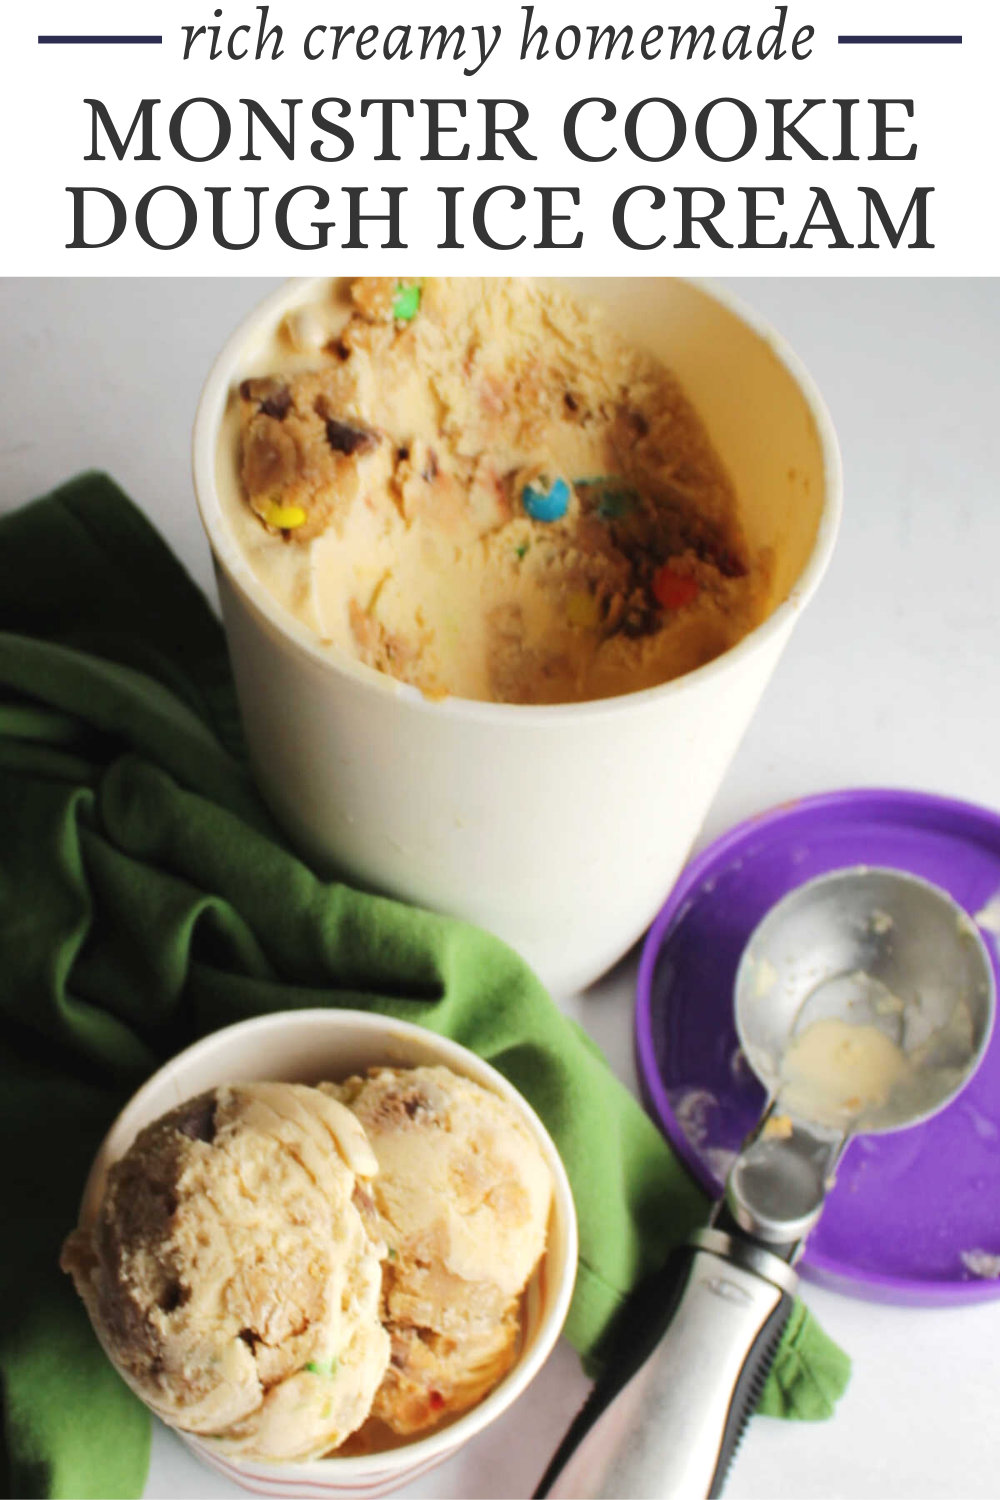 A peanut butter cookie dough ice cream base loaded with bits of frozen monster cookie dough is a match made in heaven. Your taste buds will be screaming for more ice cream!